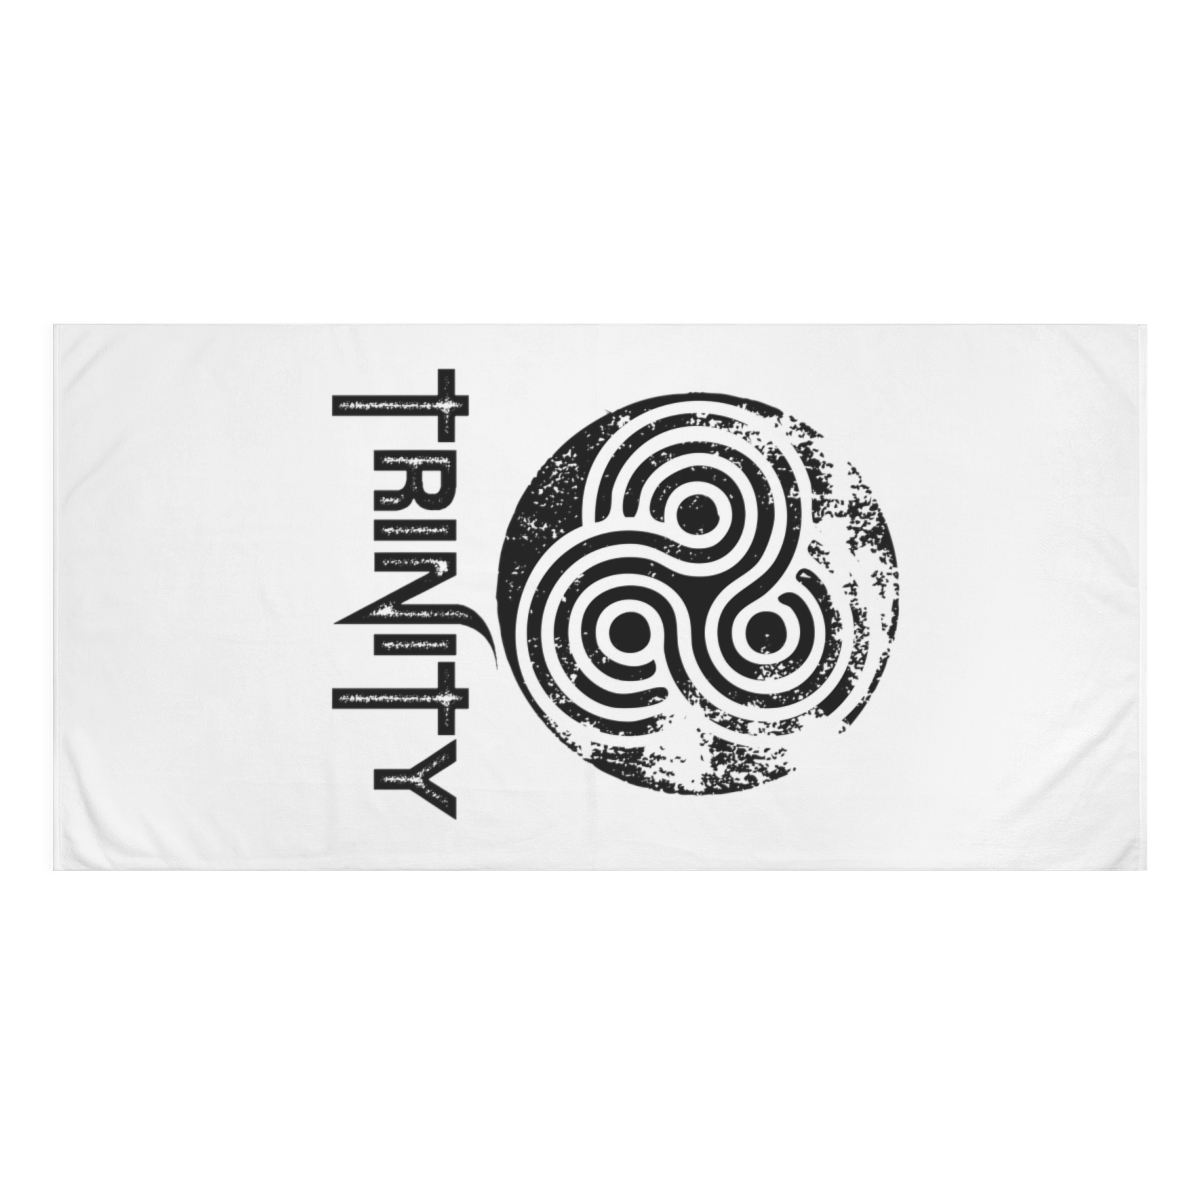 Touring Stage Towel Cotton Towel product thumbnail image